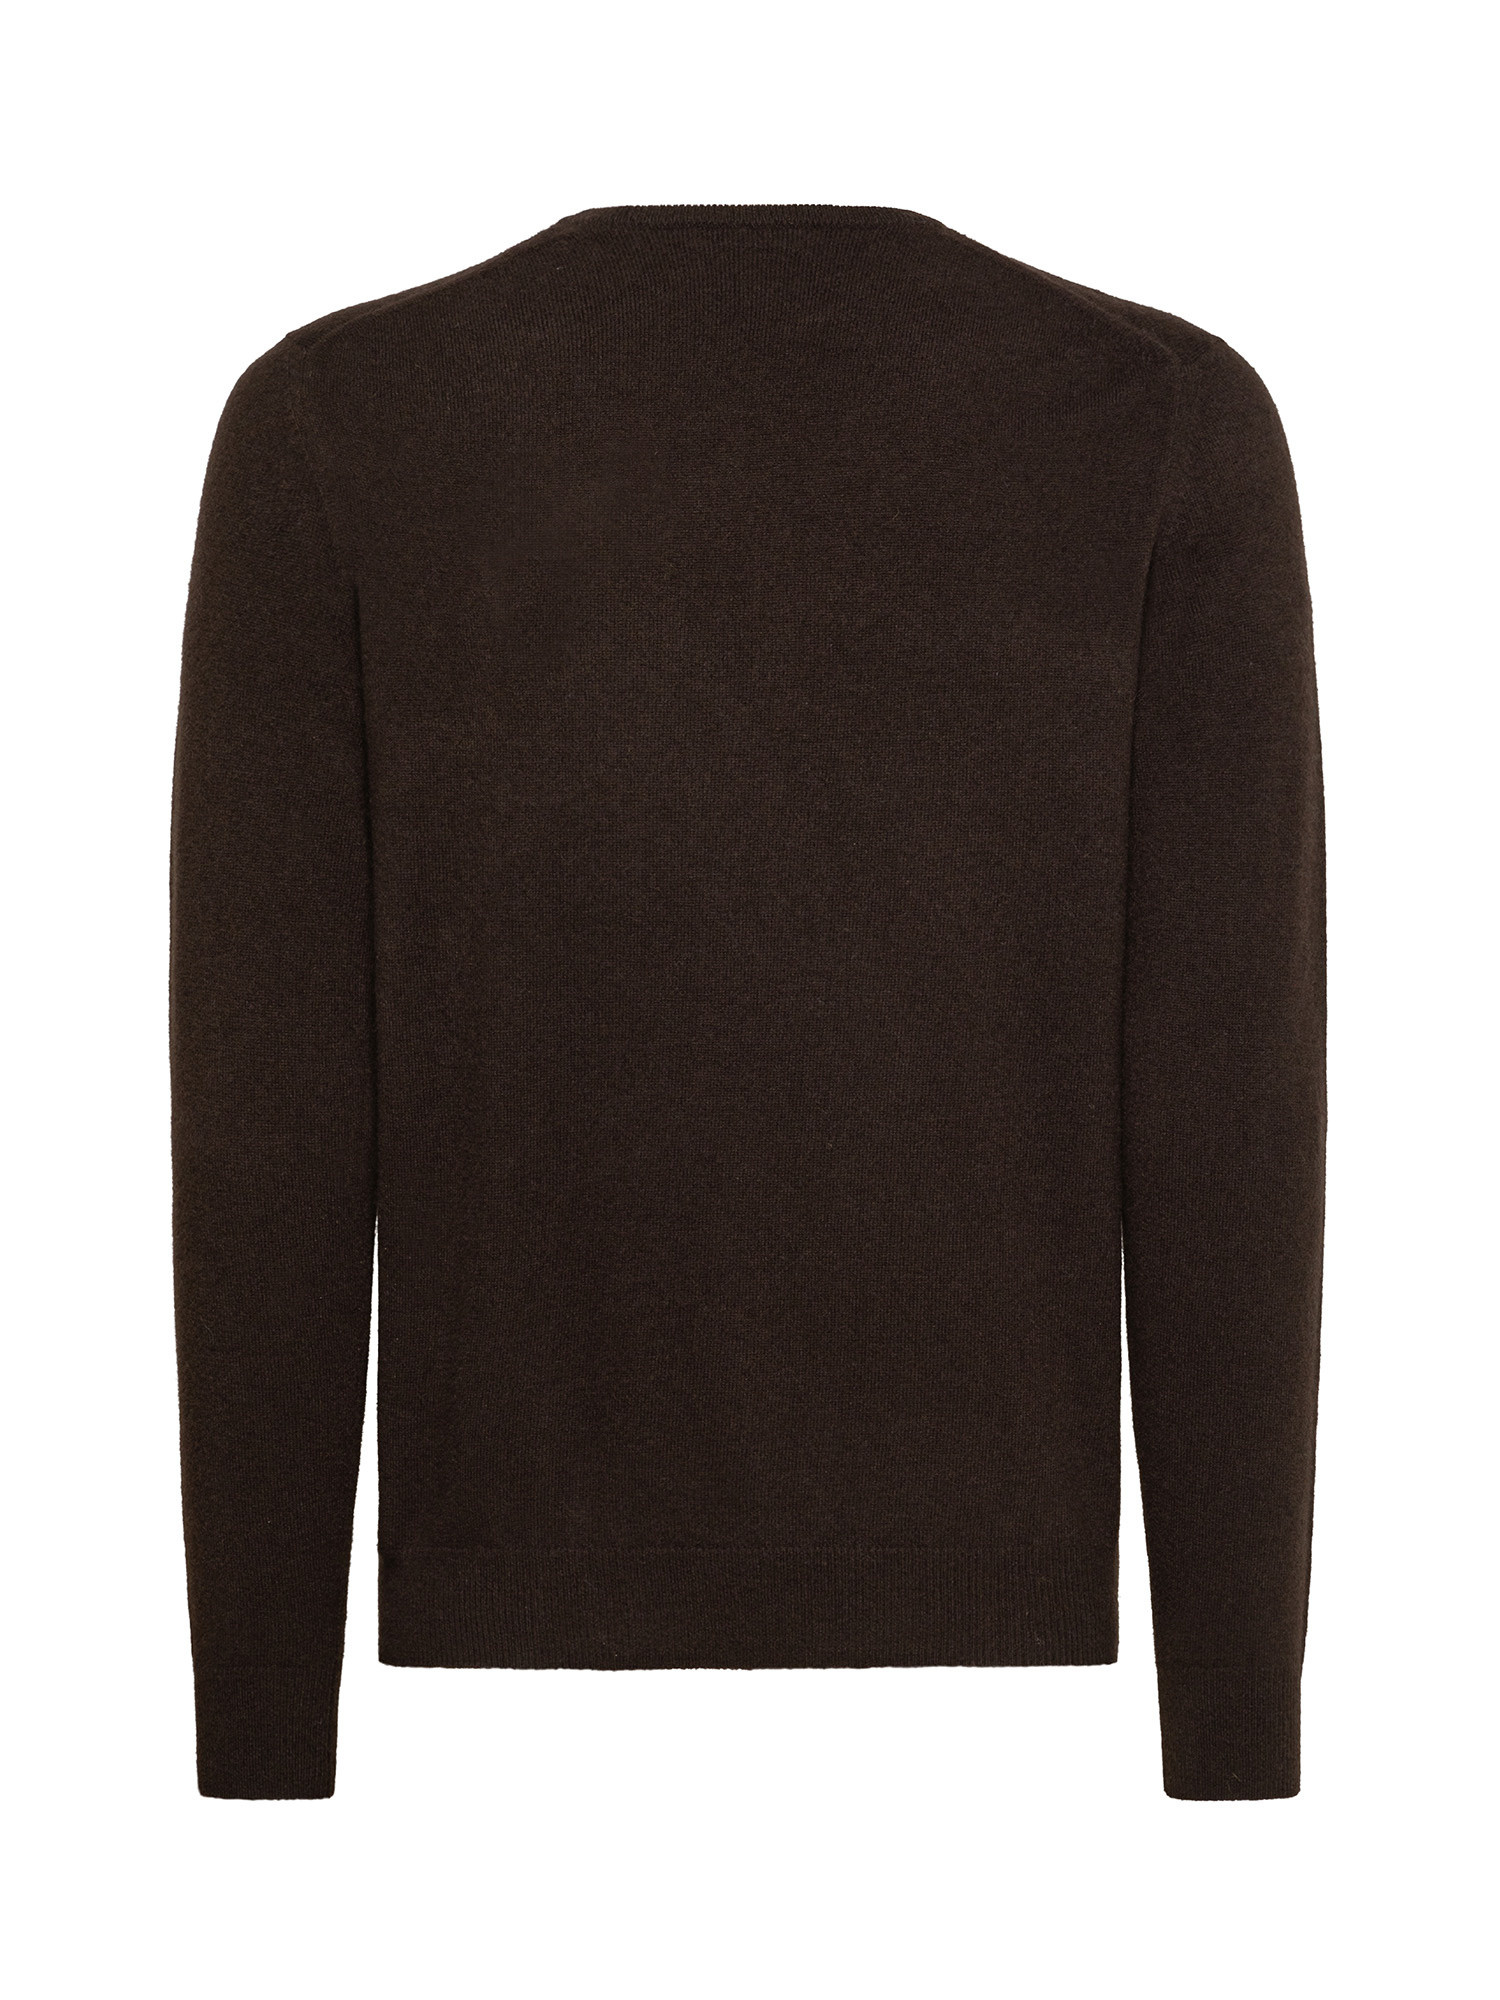 Pure cashmere crewneck pullover, Brown, large image number 1